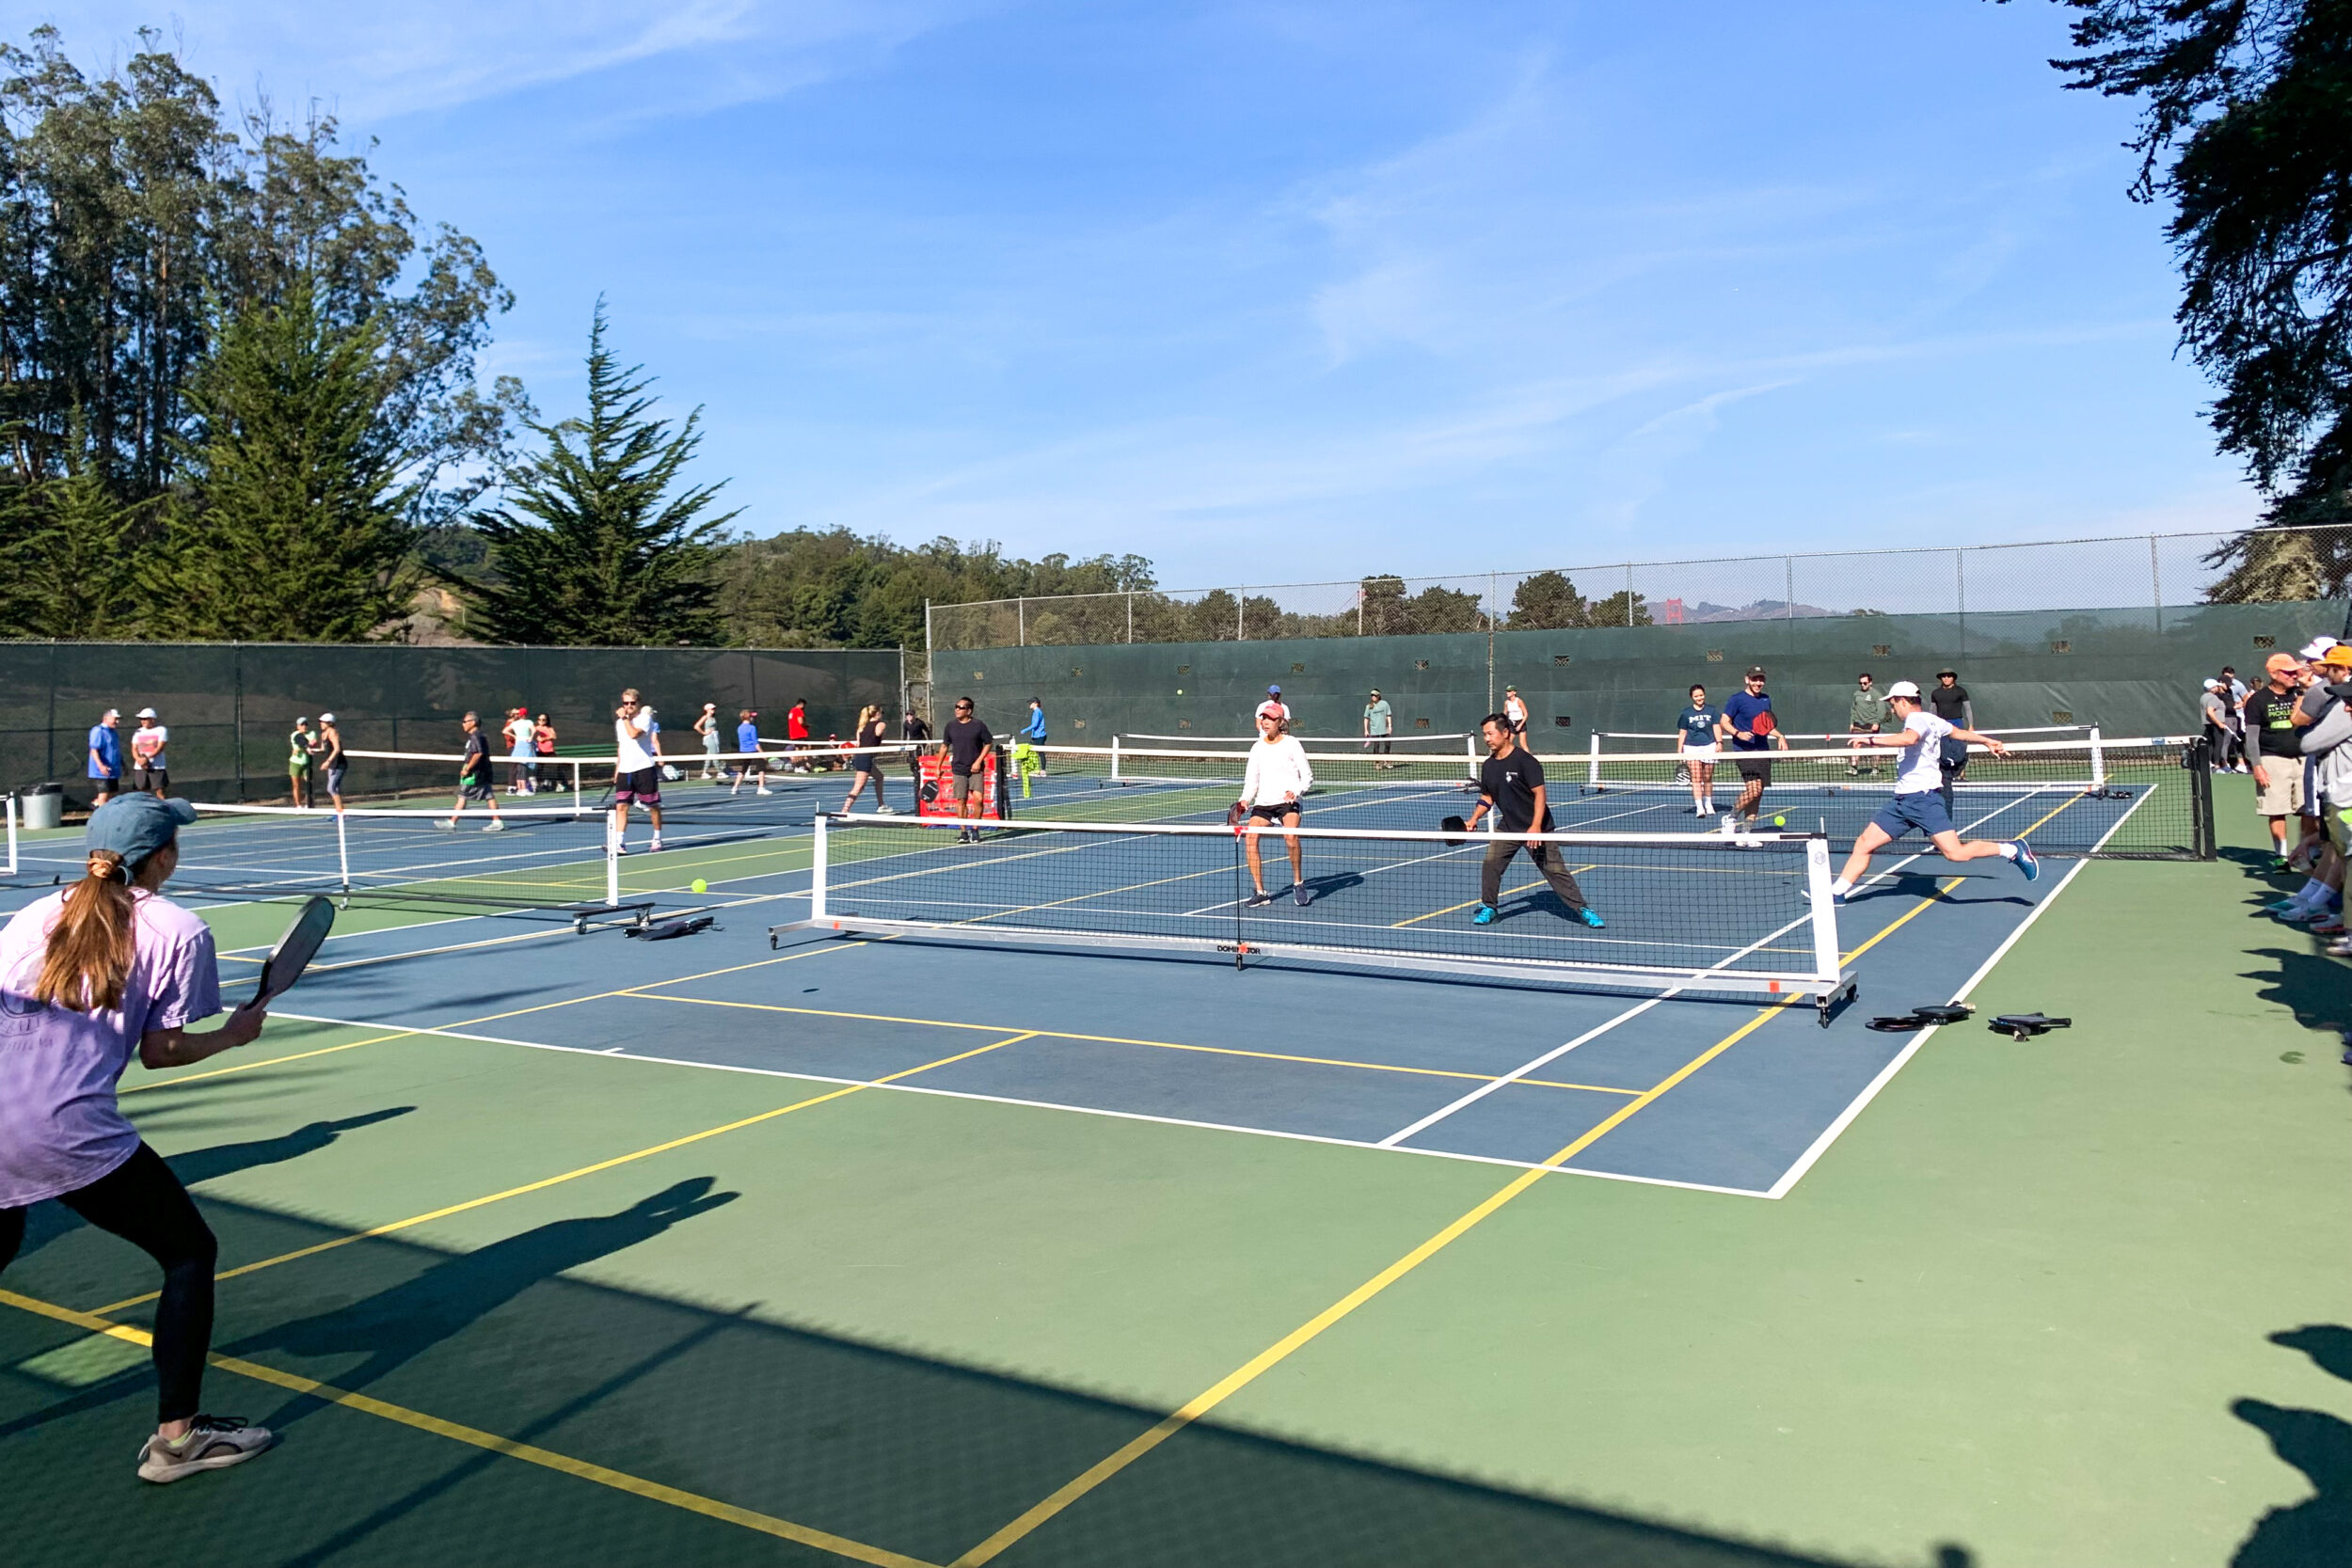 This image shows multiple people playing pickleball on outdoor courts on a sunny day.